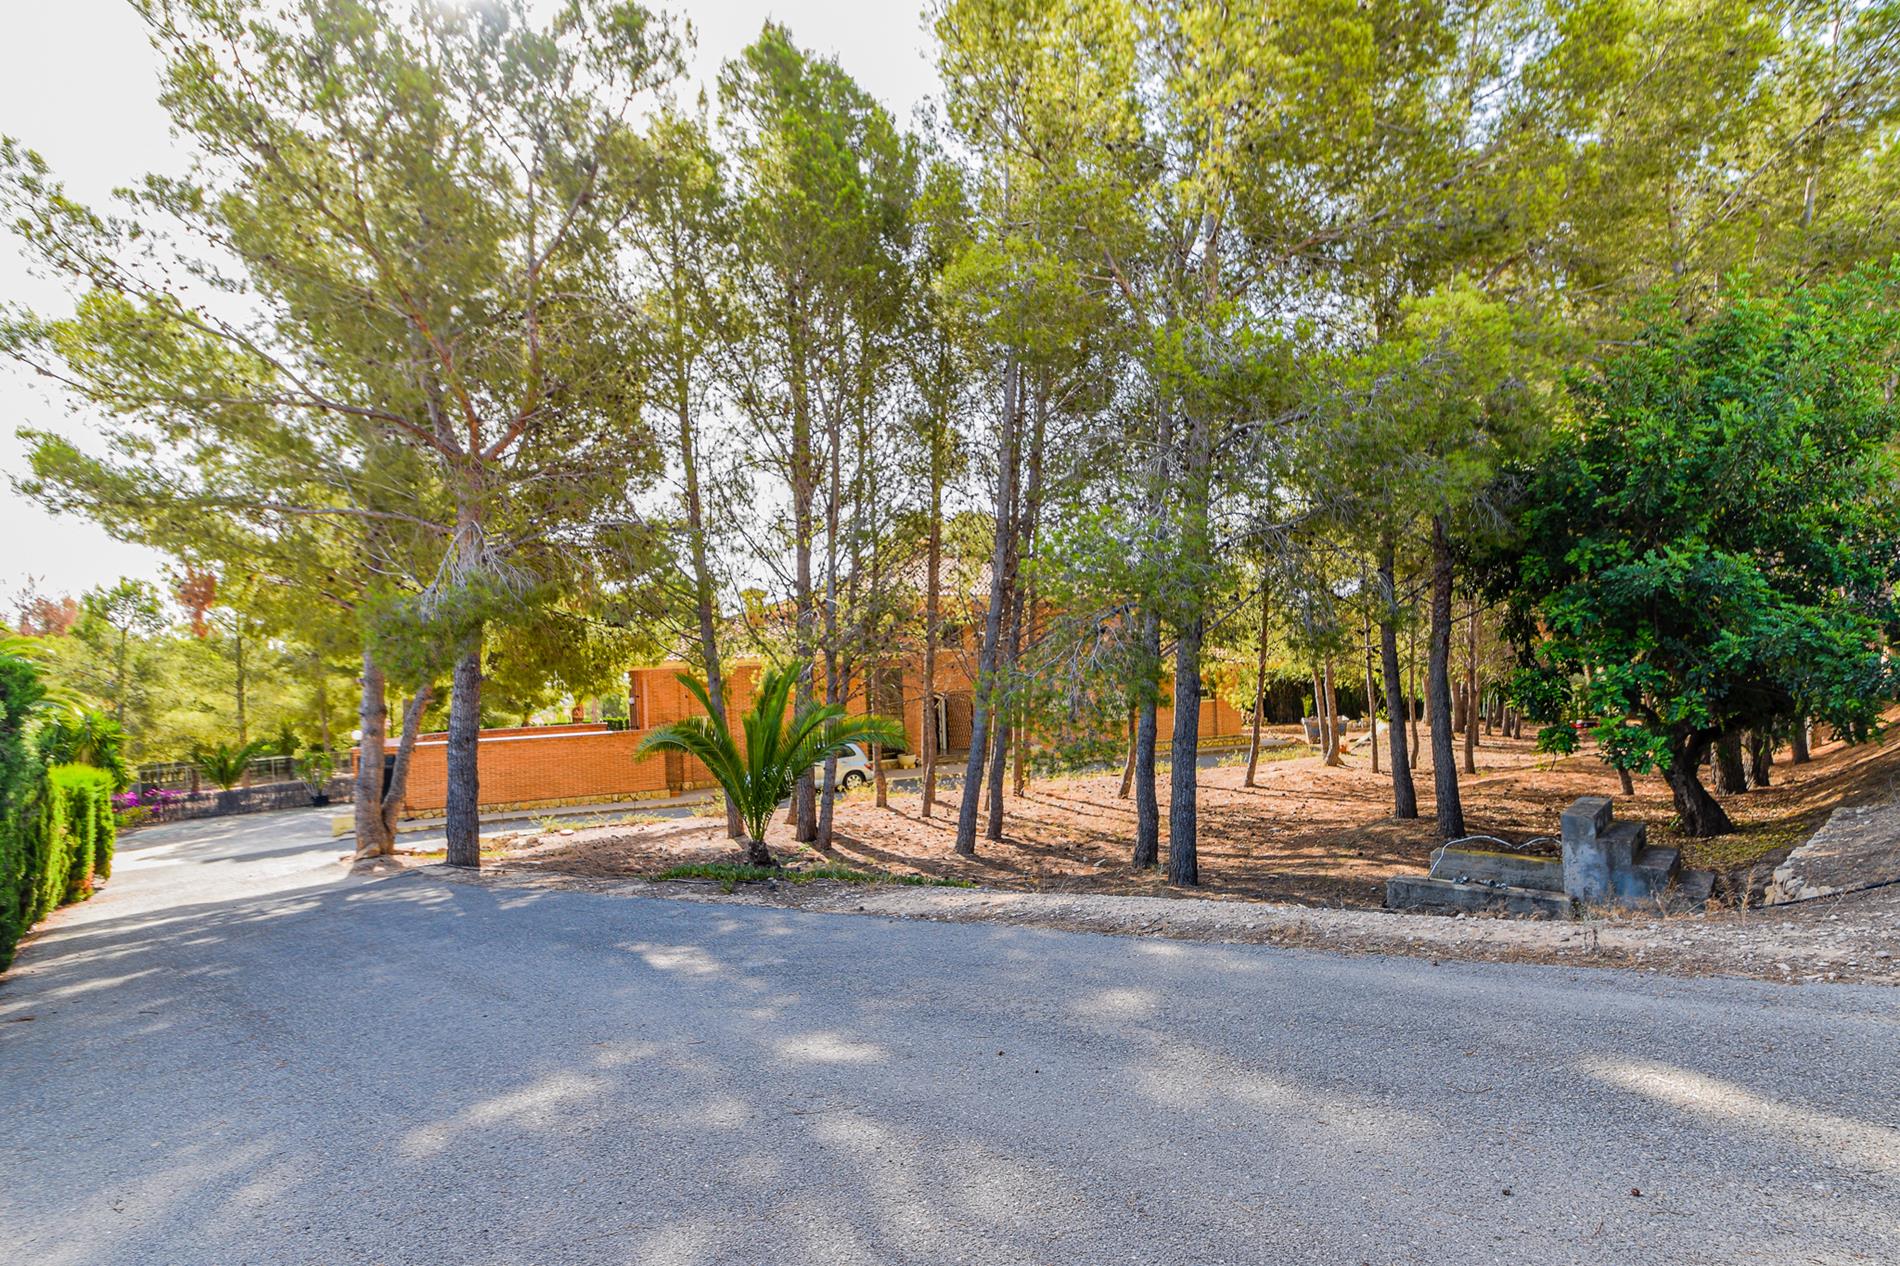 Villa for sale in La Nucia with large plot and spacious rooms